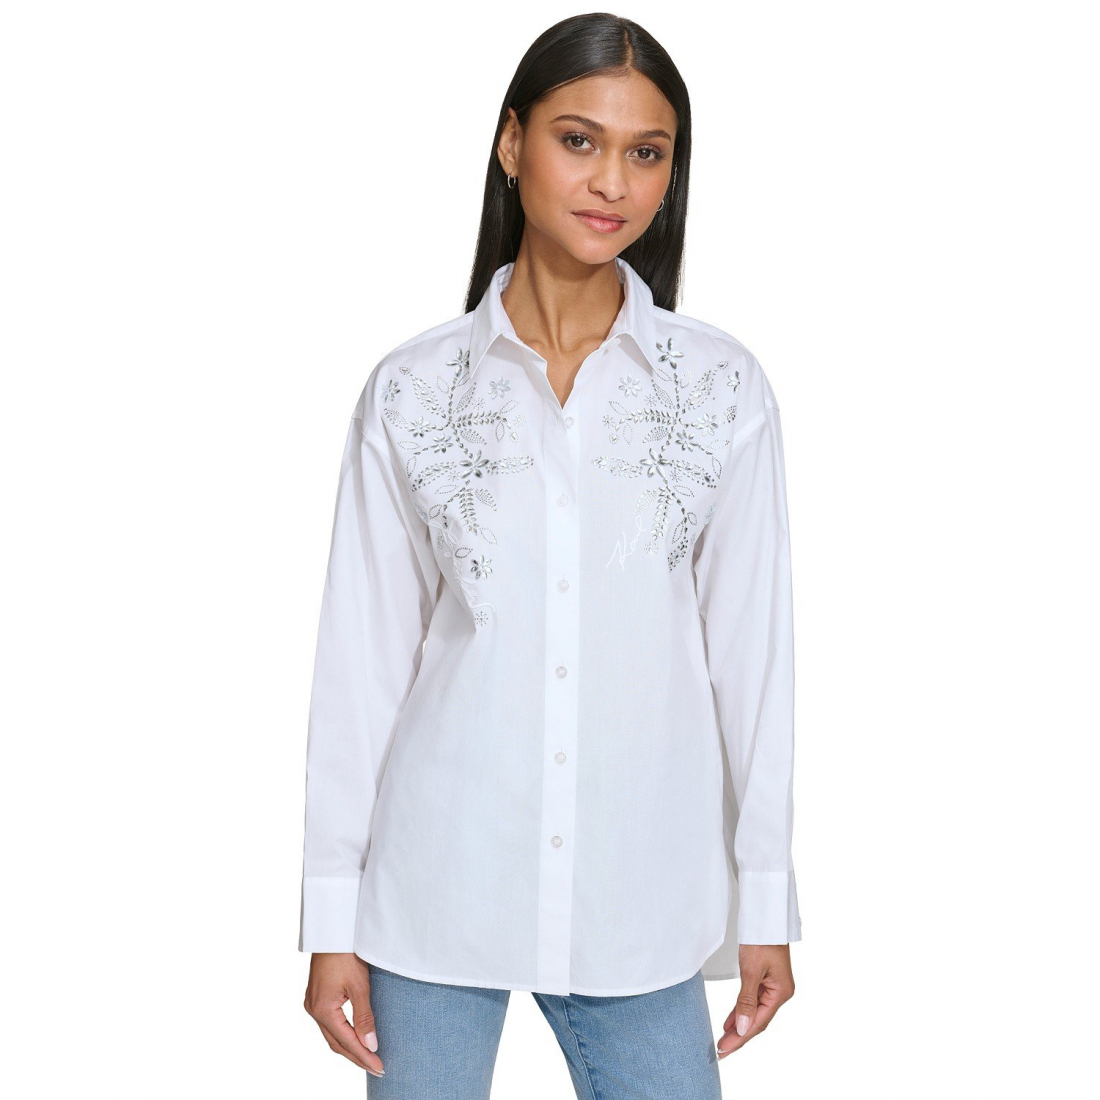 Women's 'Embellished Button-Front' Shirt